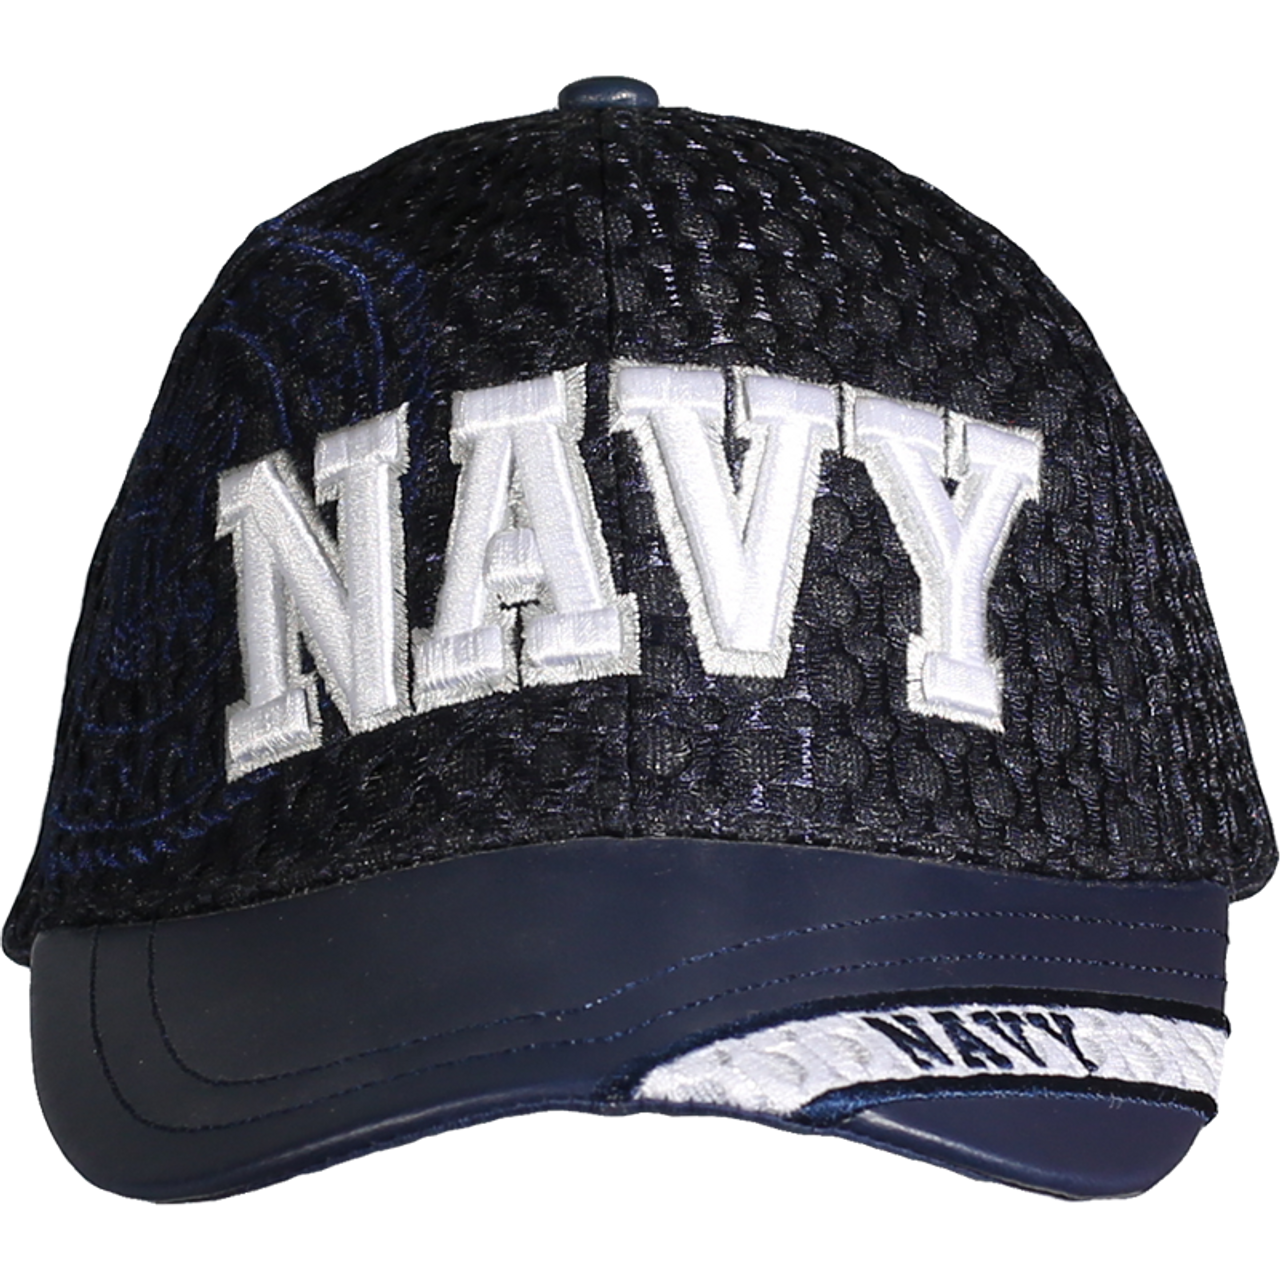 Officially Licensed - 3D Embroidered US Navy All Over Digital Camo Cap